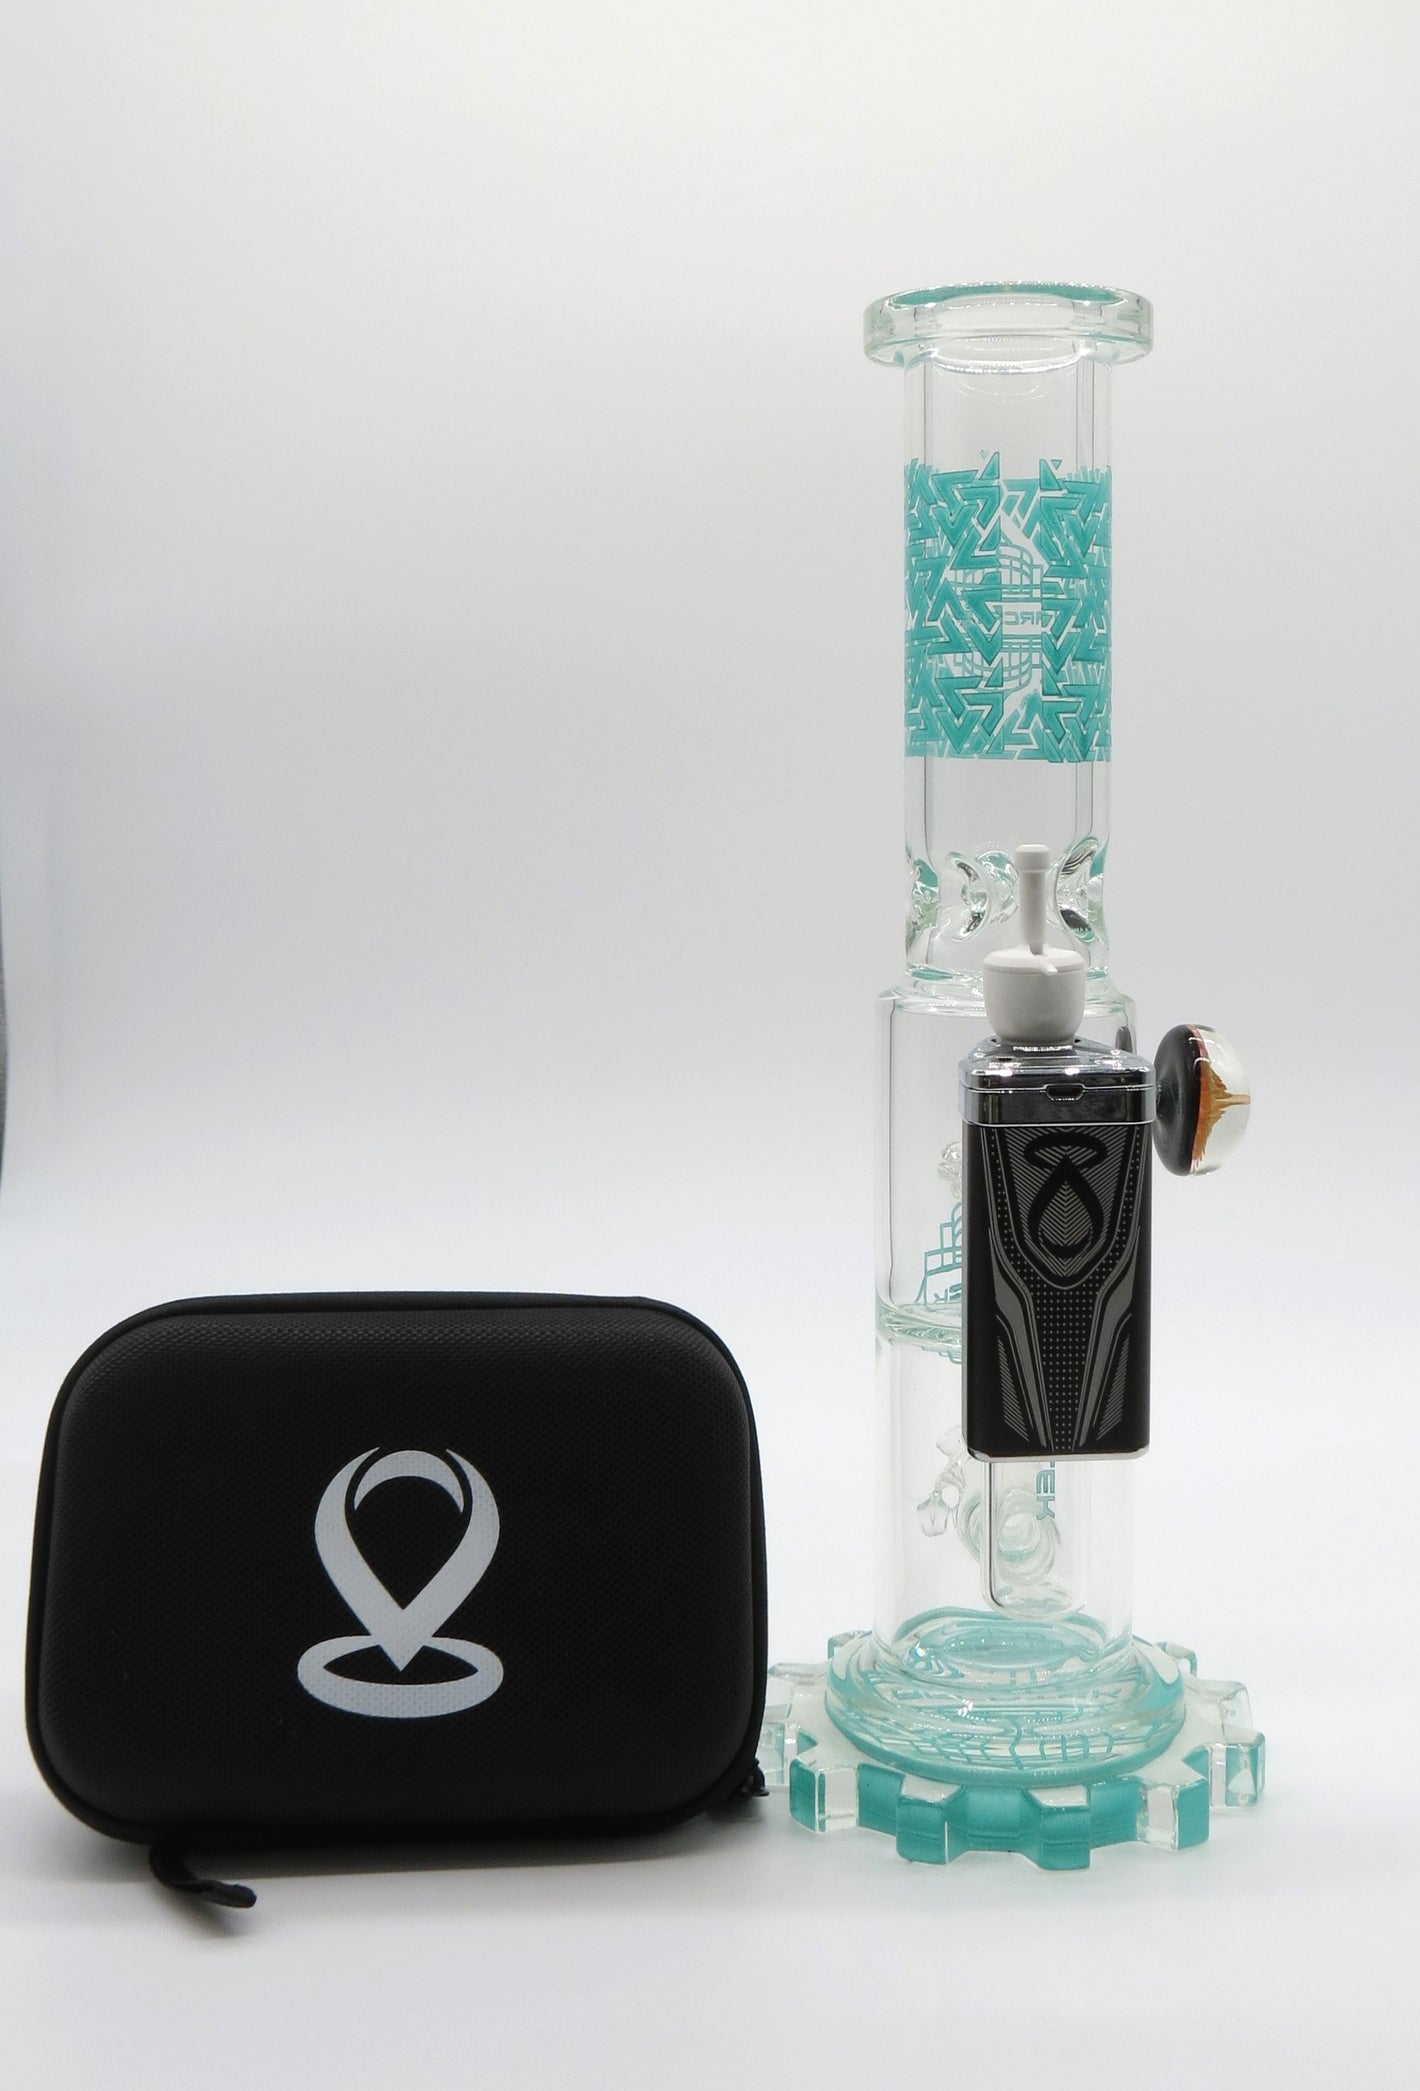 Get the Best Deals on Bong Accessories, Fast Shipping